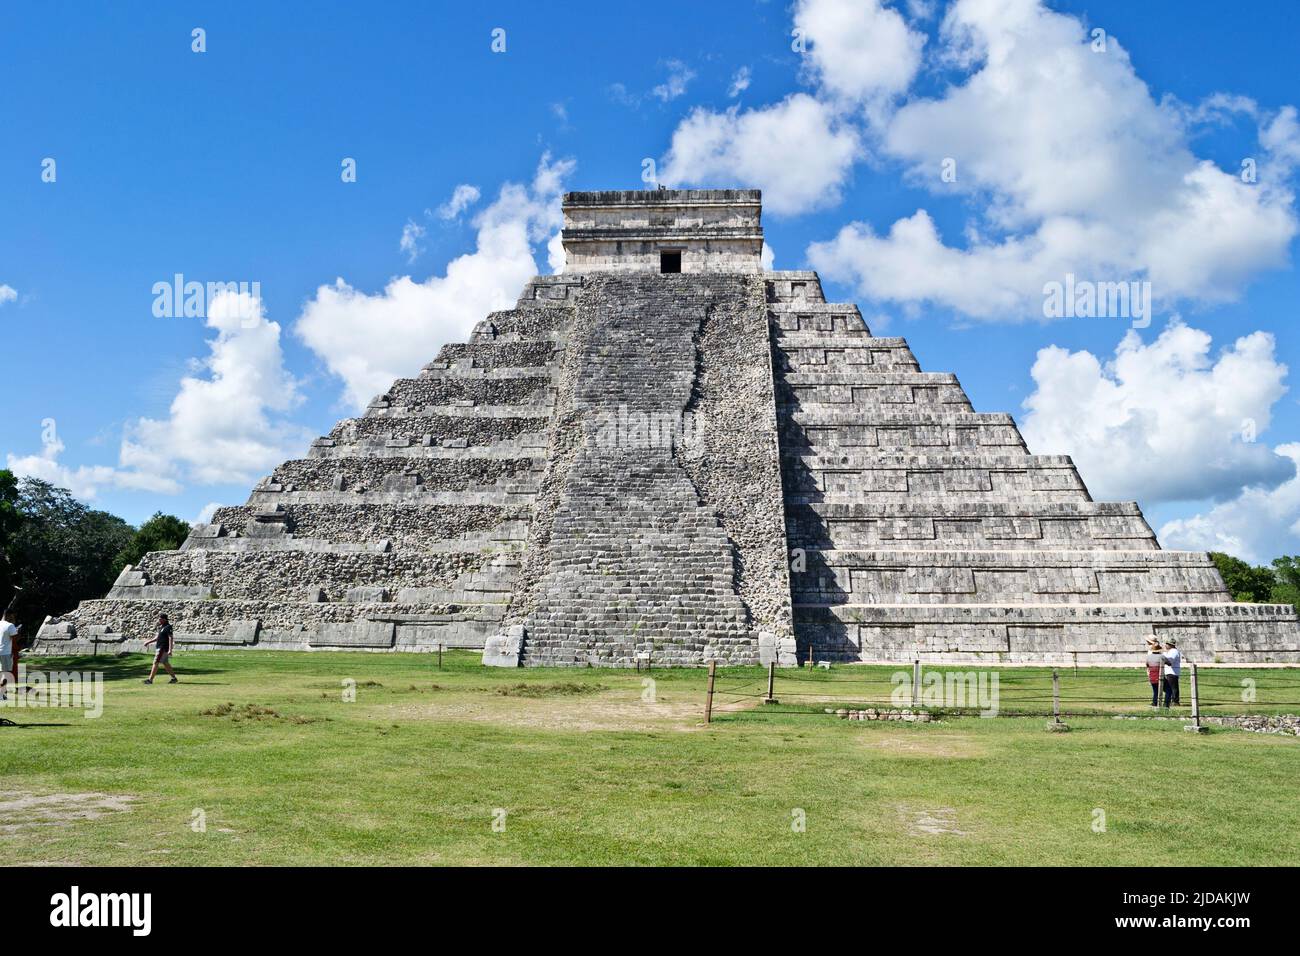 Chichen Itza, one of the most visited archaeological sites, Mexico. Stock Photo